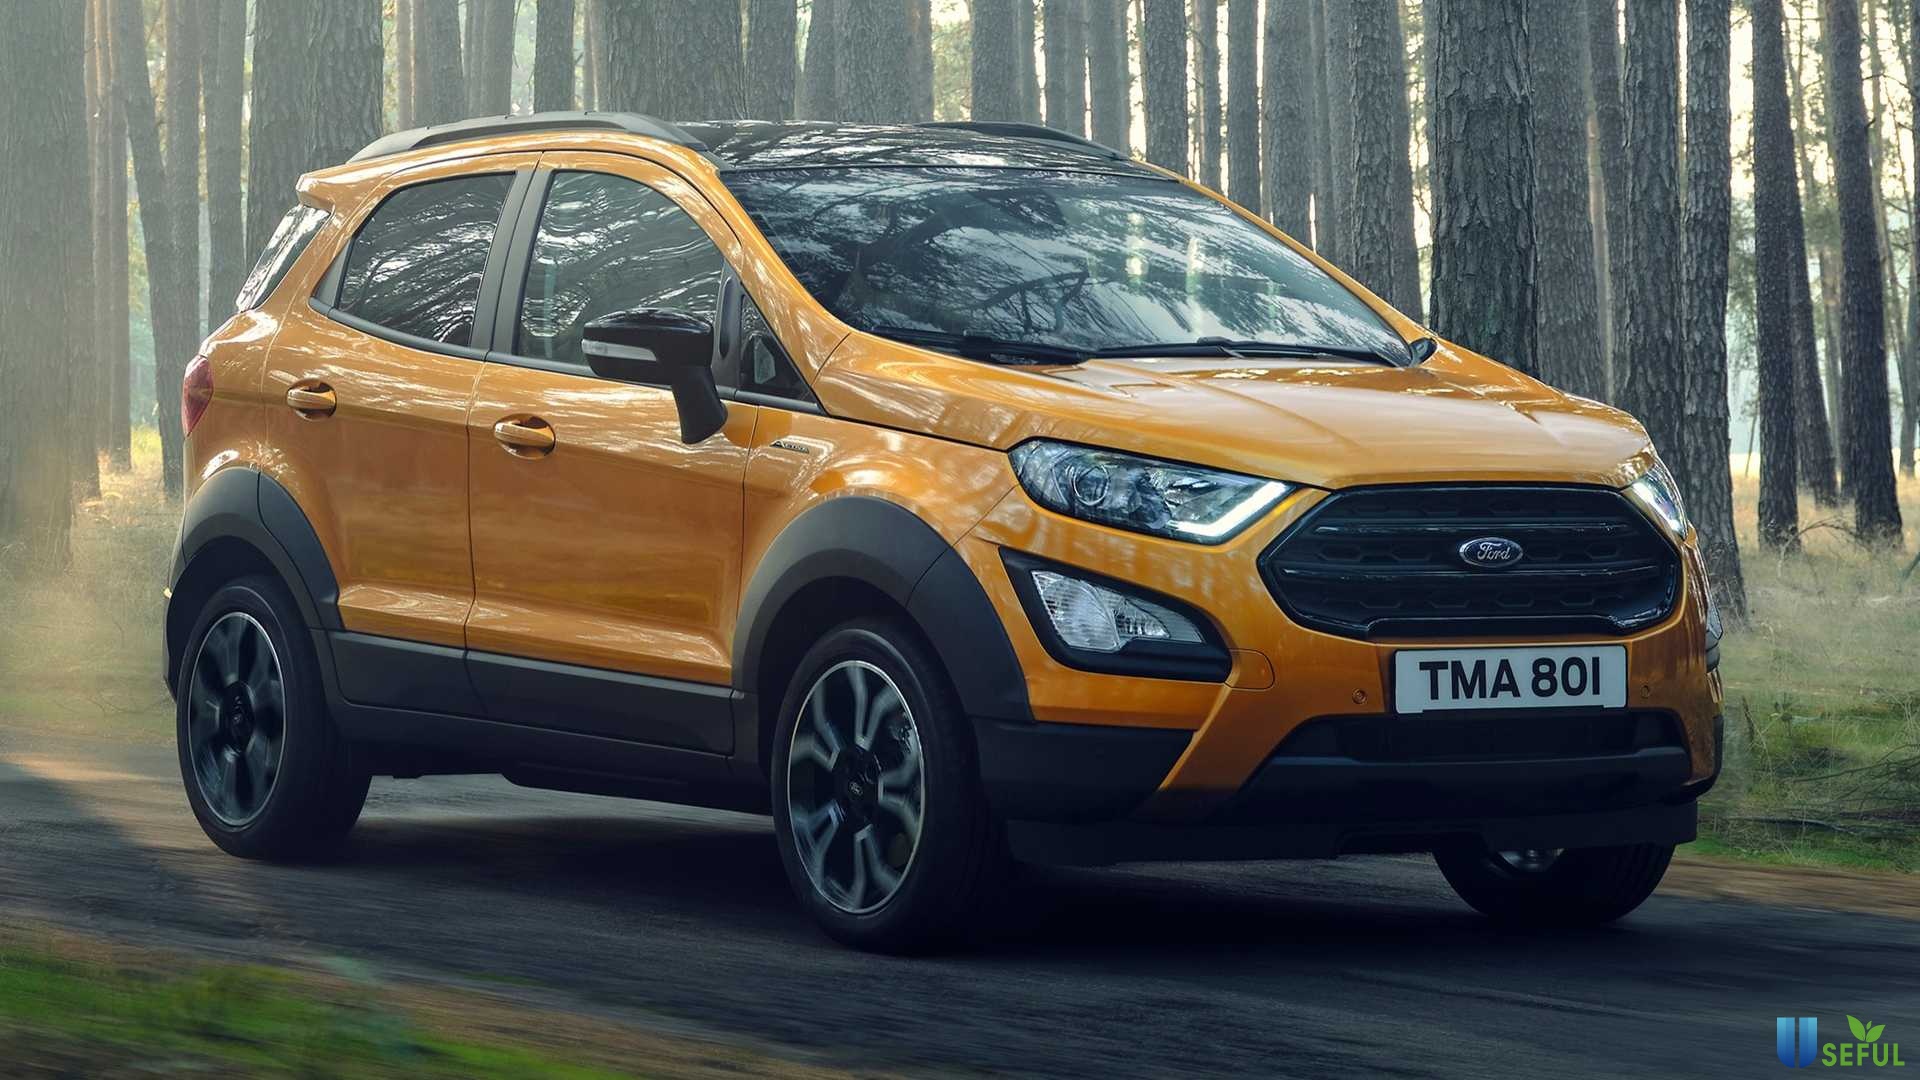 2021-ford-ecosport-ha-giang